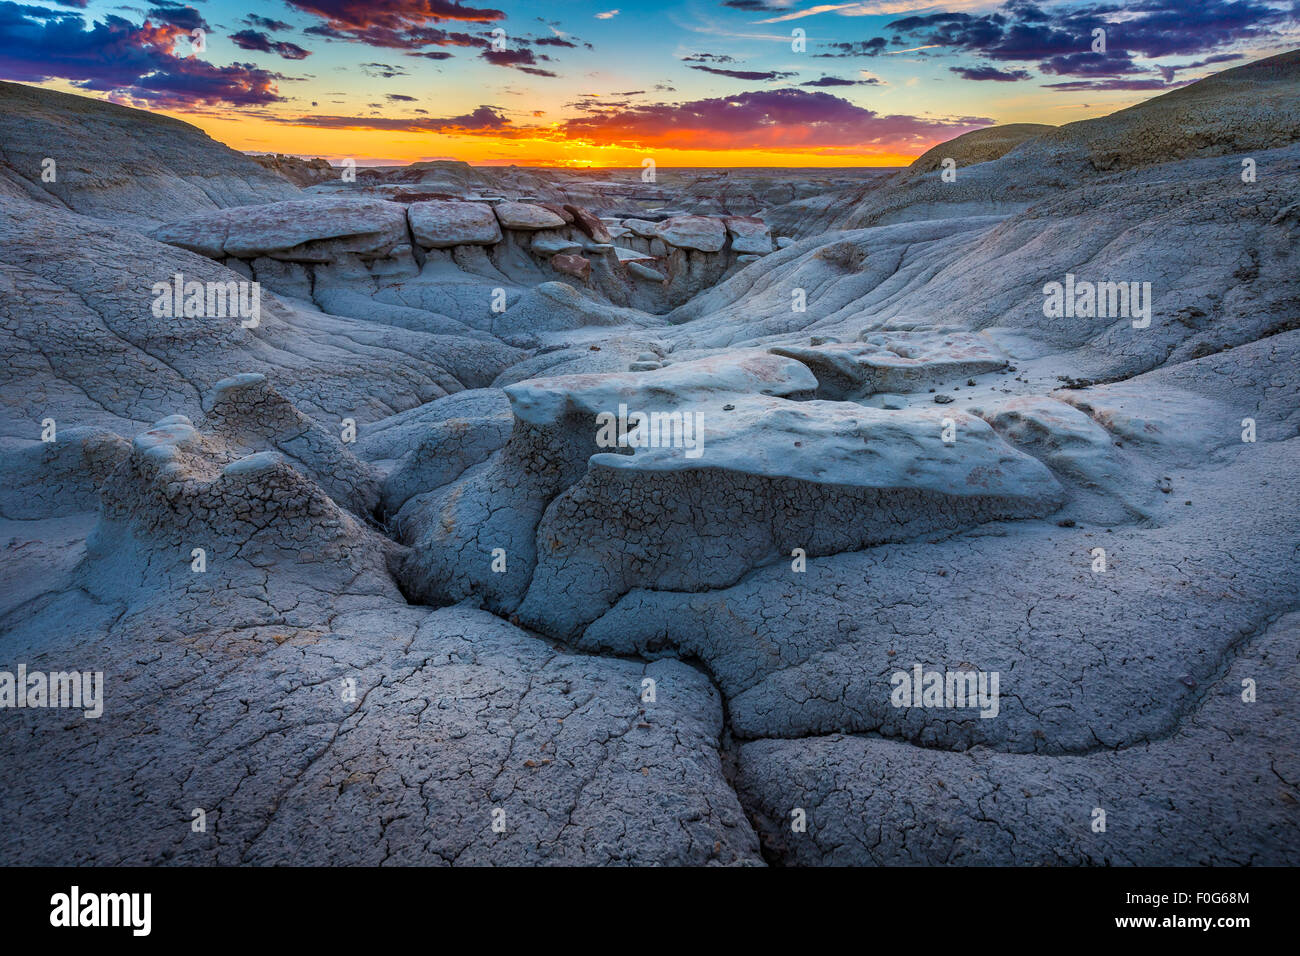 The Bisti/De-Na-Zin Wilderness is a 45,000-acre wilderness area located in San Juan County in the U.S. state of New Mexico. Stock Photo